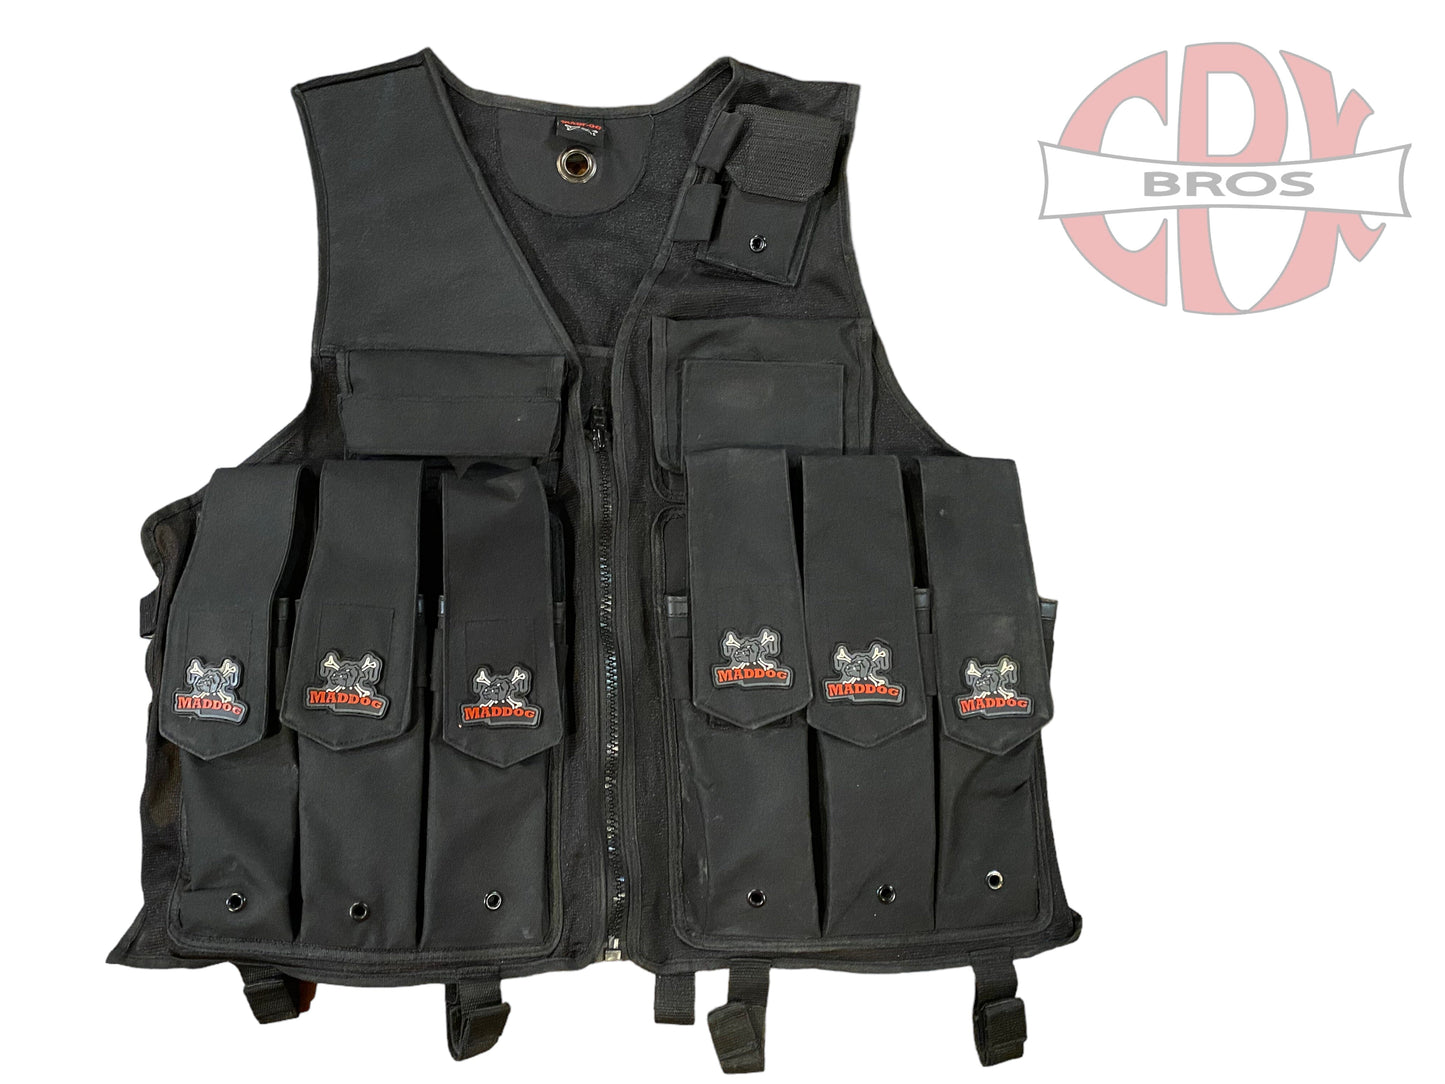 Used Maddog PaintballTactical Vest Paintball Gun from CPXBrosPaintball Buy/Sell/Trade Paintball Markers, Paintball Hoppers, Paintball Masks, and Hormesis Headbands